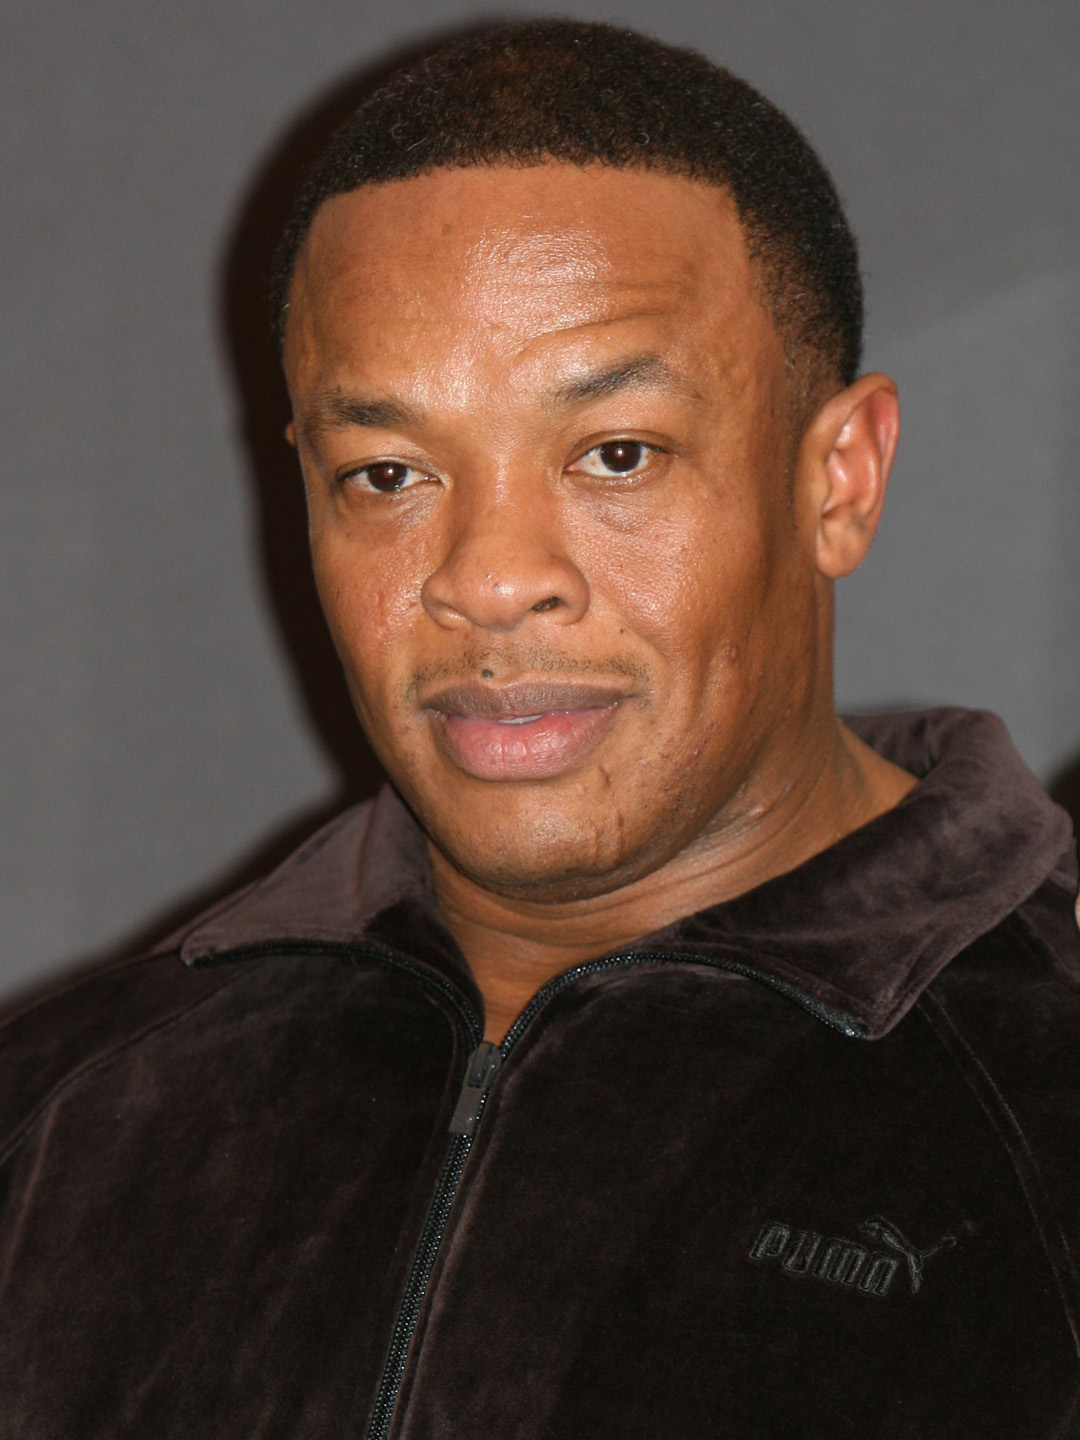 How tall is Dr Dre?